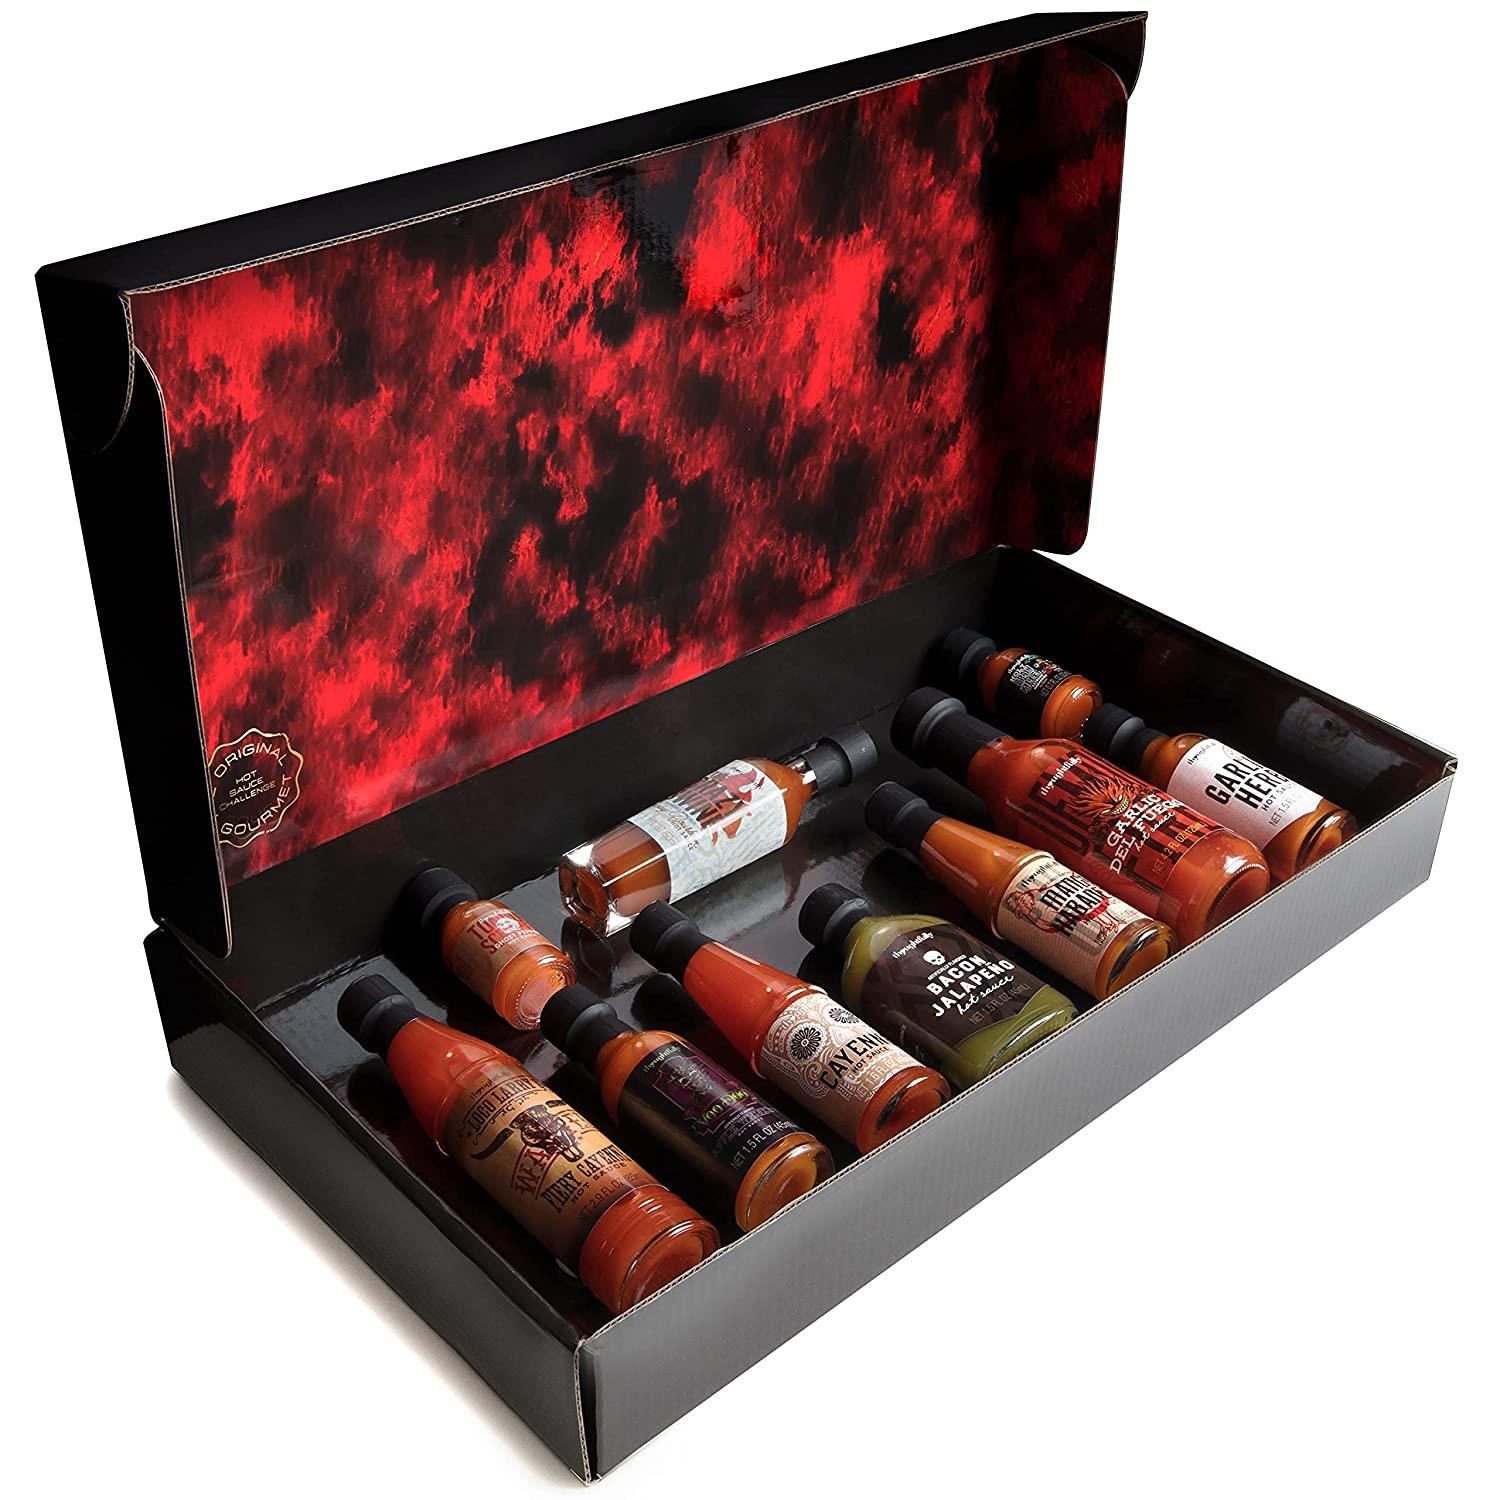 Thoughtfully Gourmet, Hot Sauce Challenge Gift Set, Includes Spicy Hot  Sauces for a Hot Sauce Challenge, Pack of 10